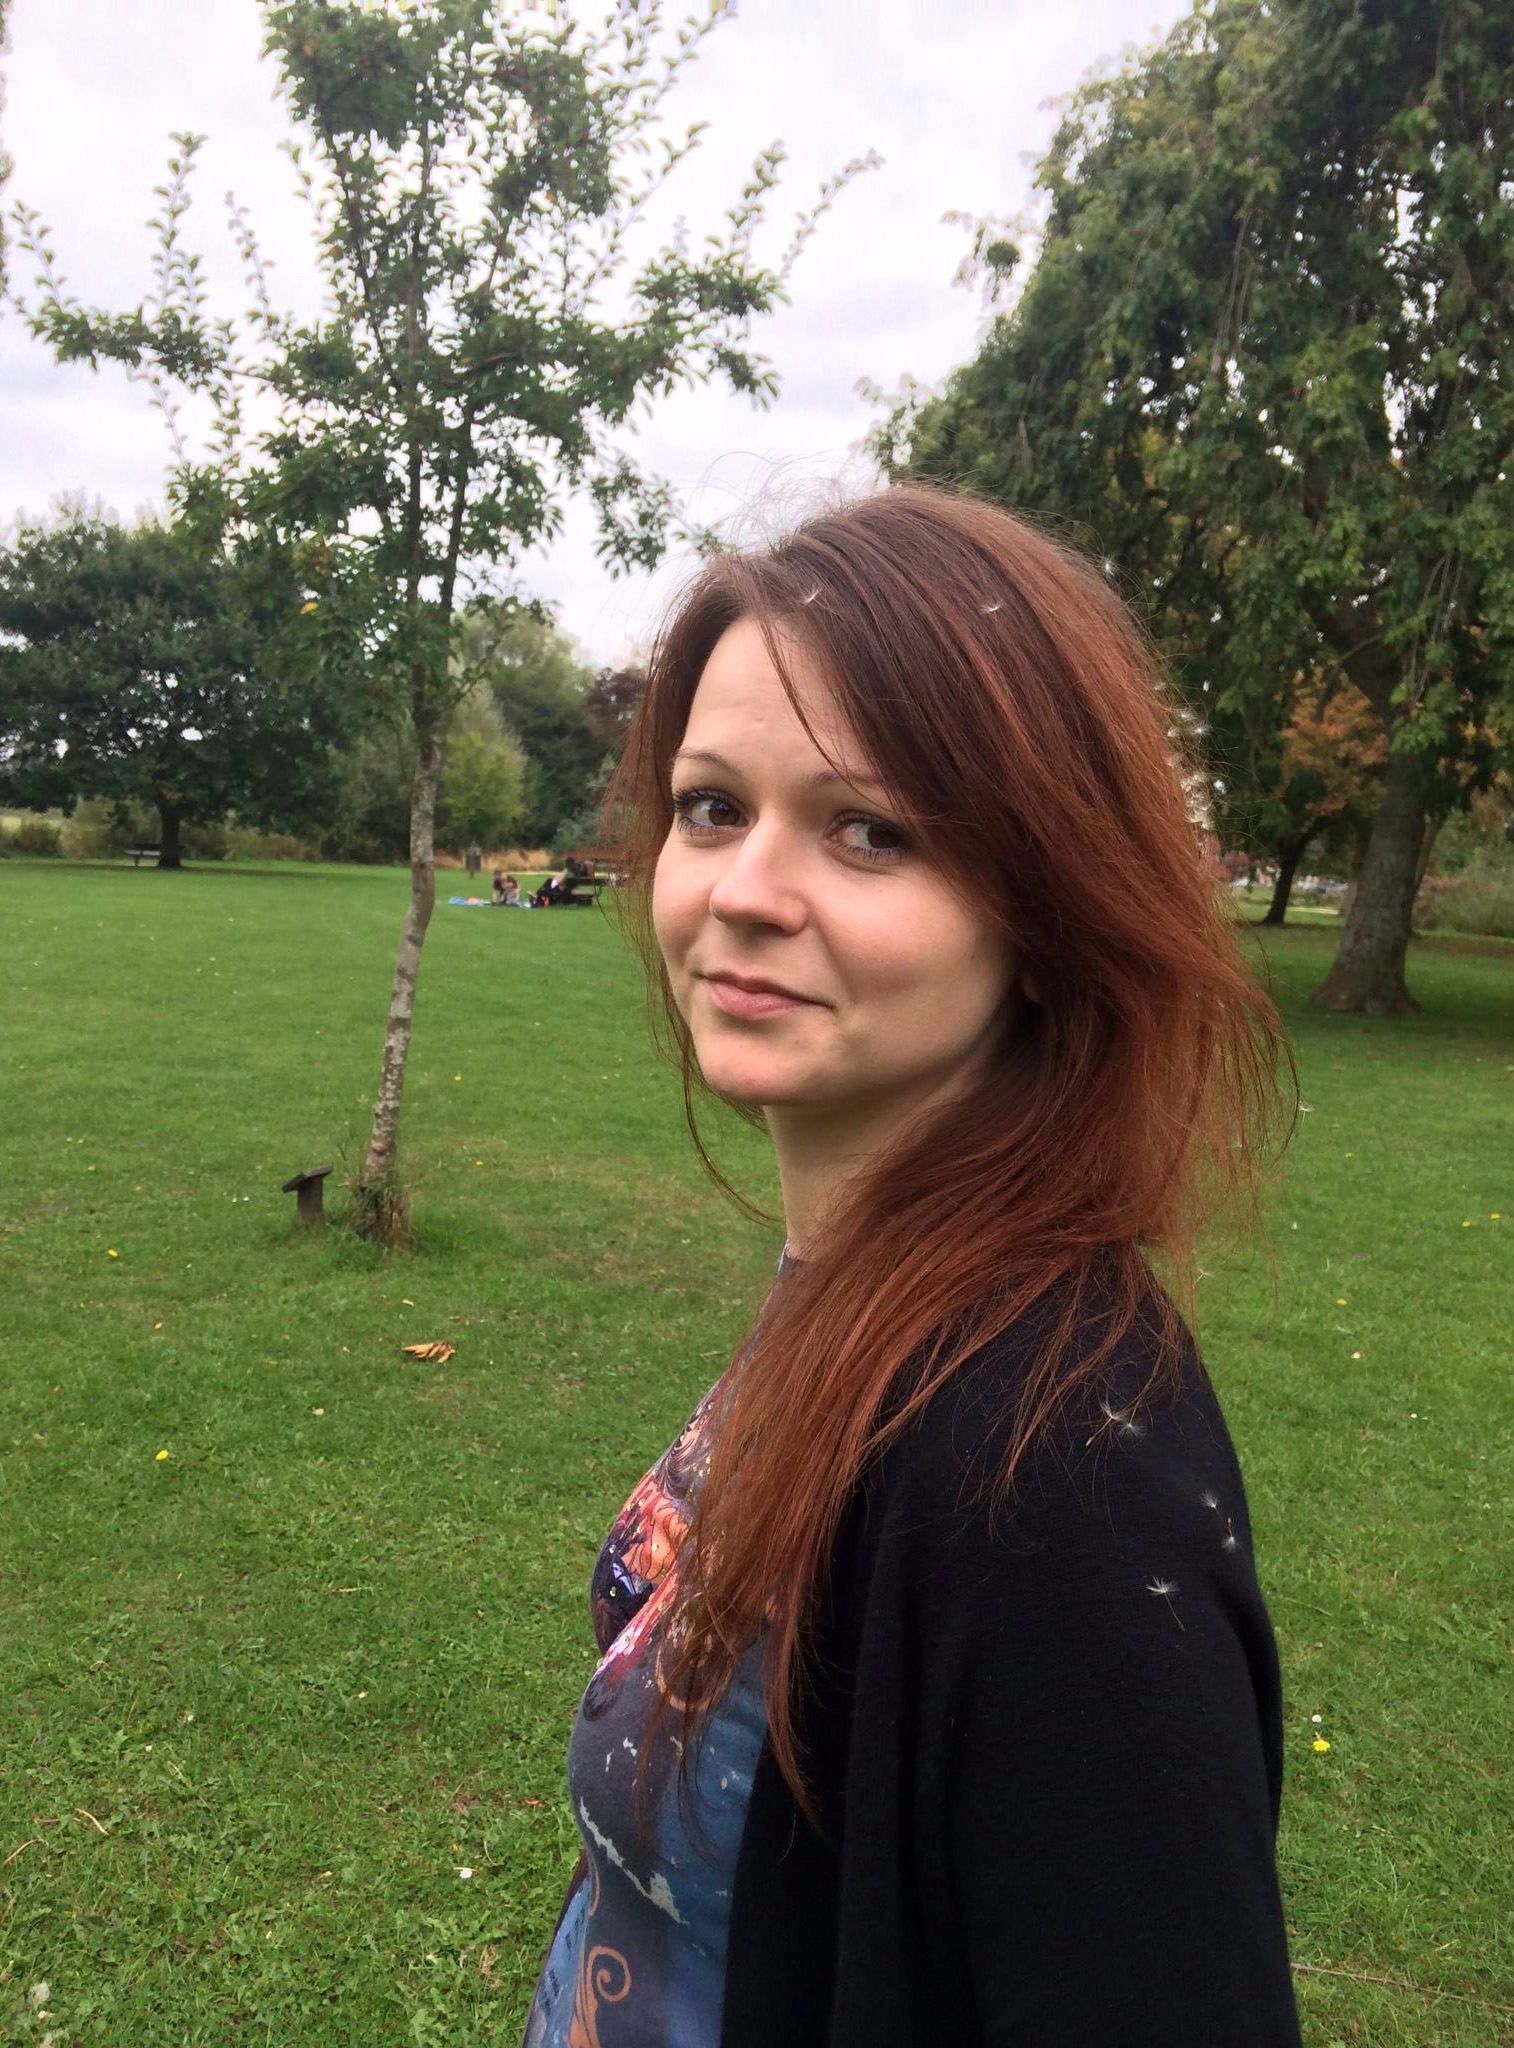 PHOTO: Daughter of former Russian Spy Sergei Skripal, Yulia Skripal pictured in this undated photo.